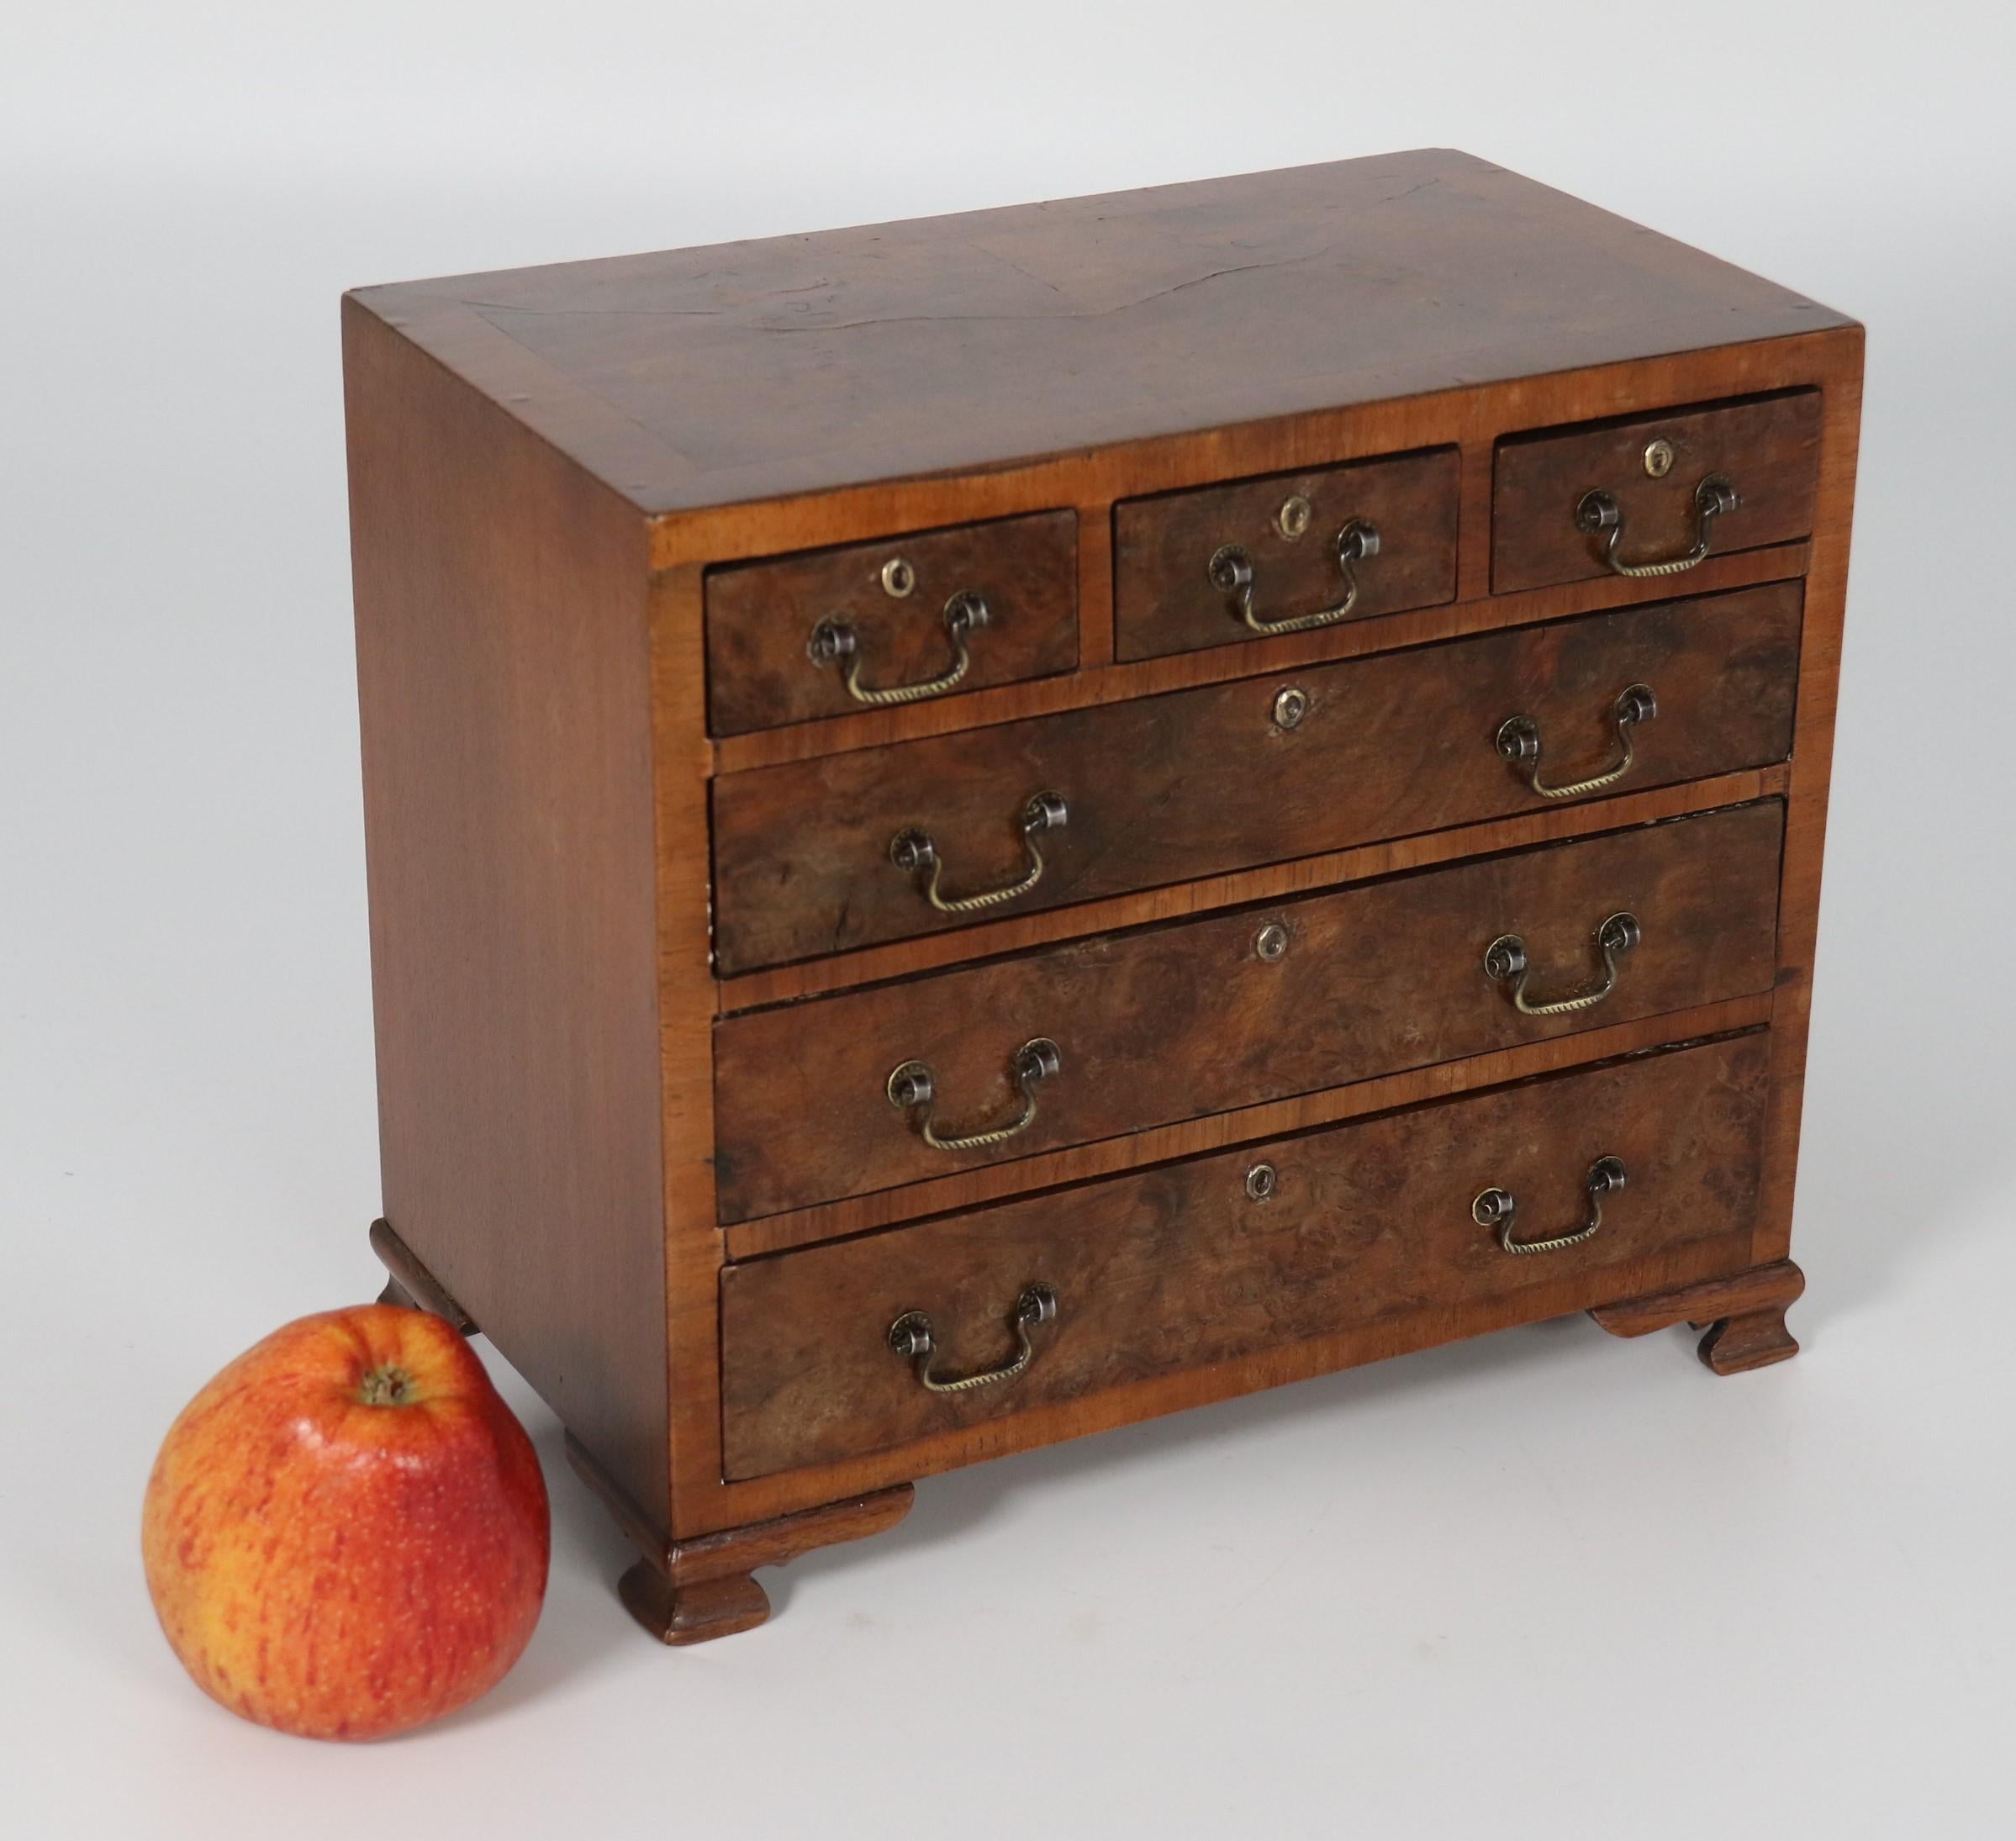 
This most pleasing and rare small miniature apprentice type chest of drawers is beautifully handmade and veneered in burr walnut with a book matched top finished with a cross banded edge in straight grain walnut which matches the parting rails and